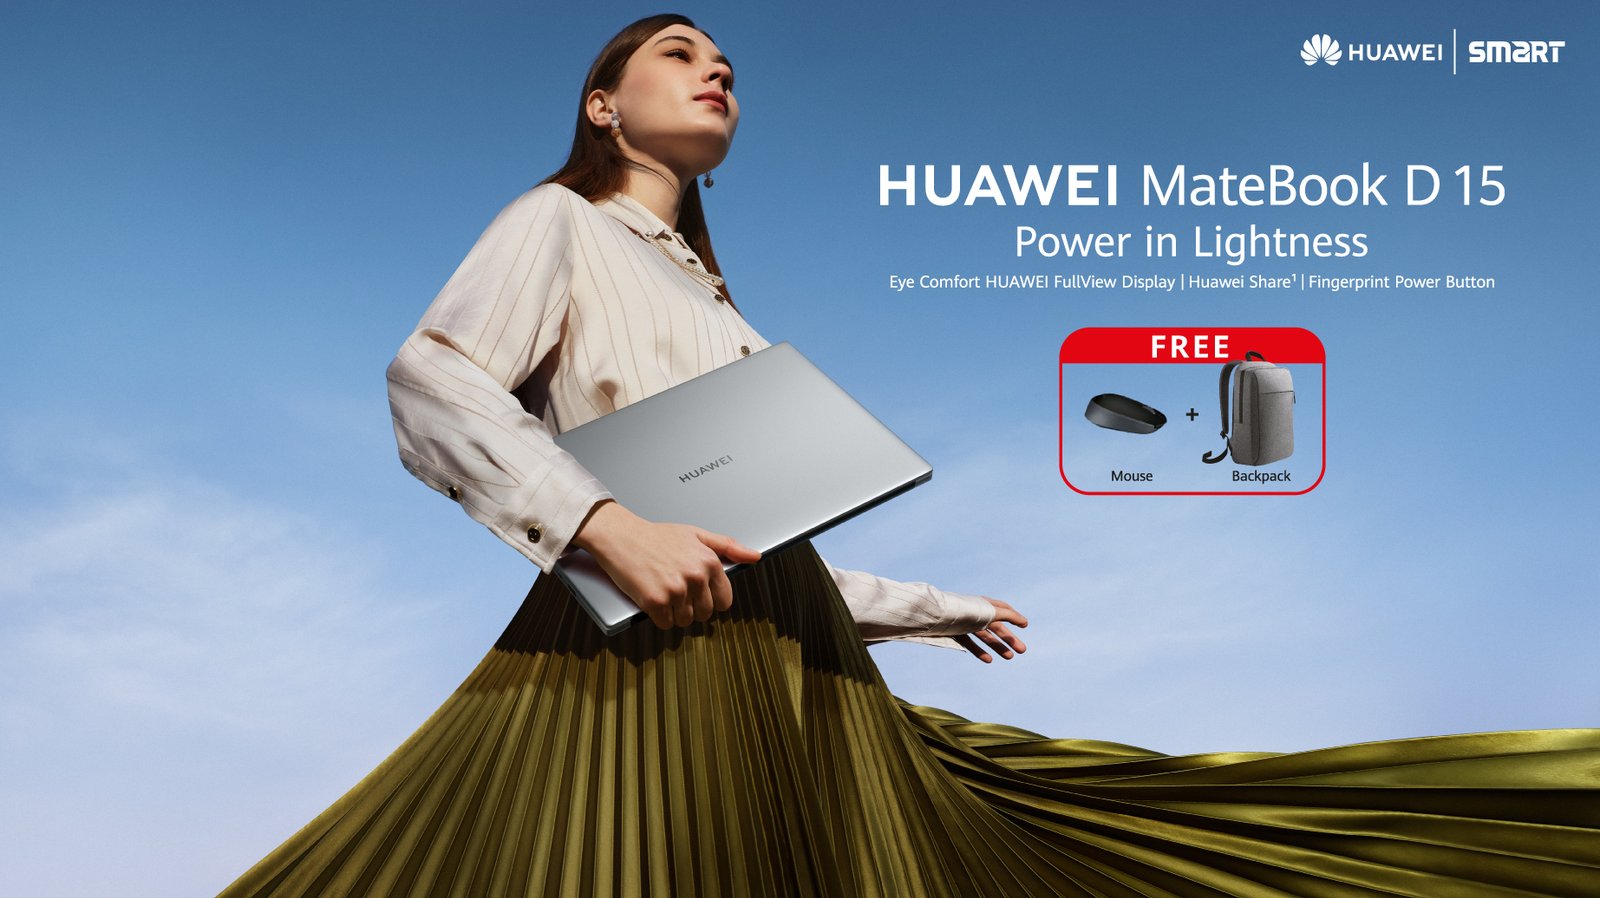 Huawei MateBook D15 will be available in the BD market soon